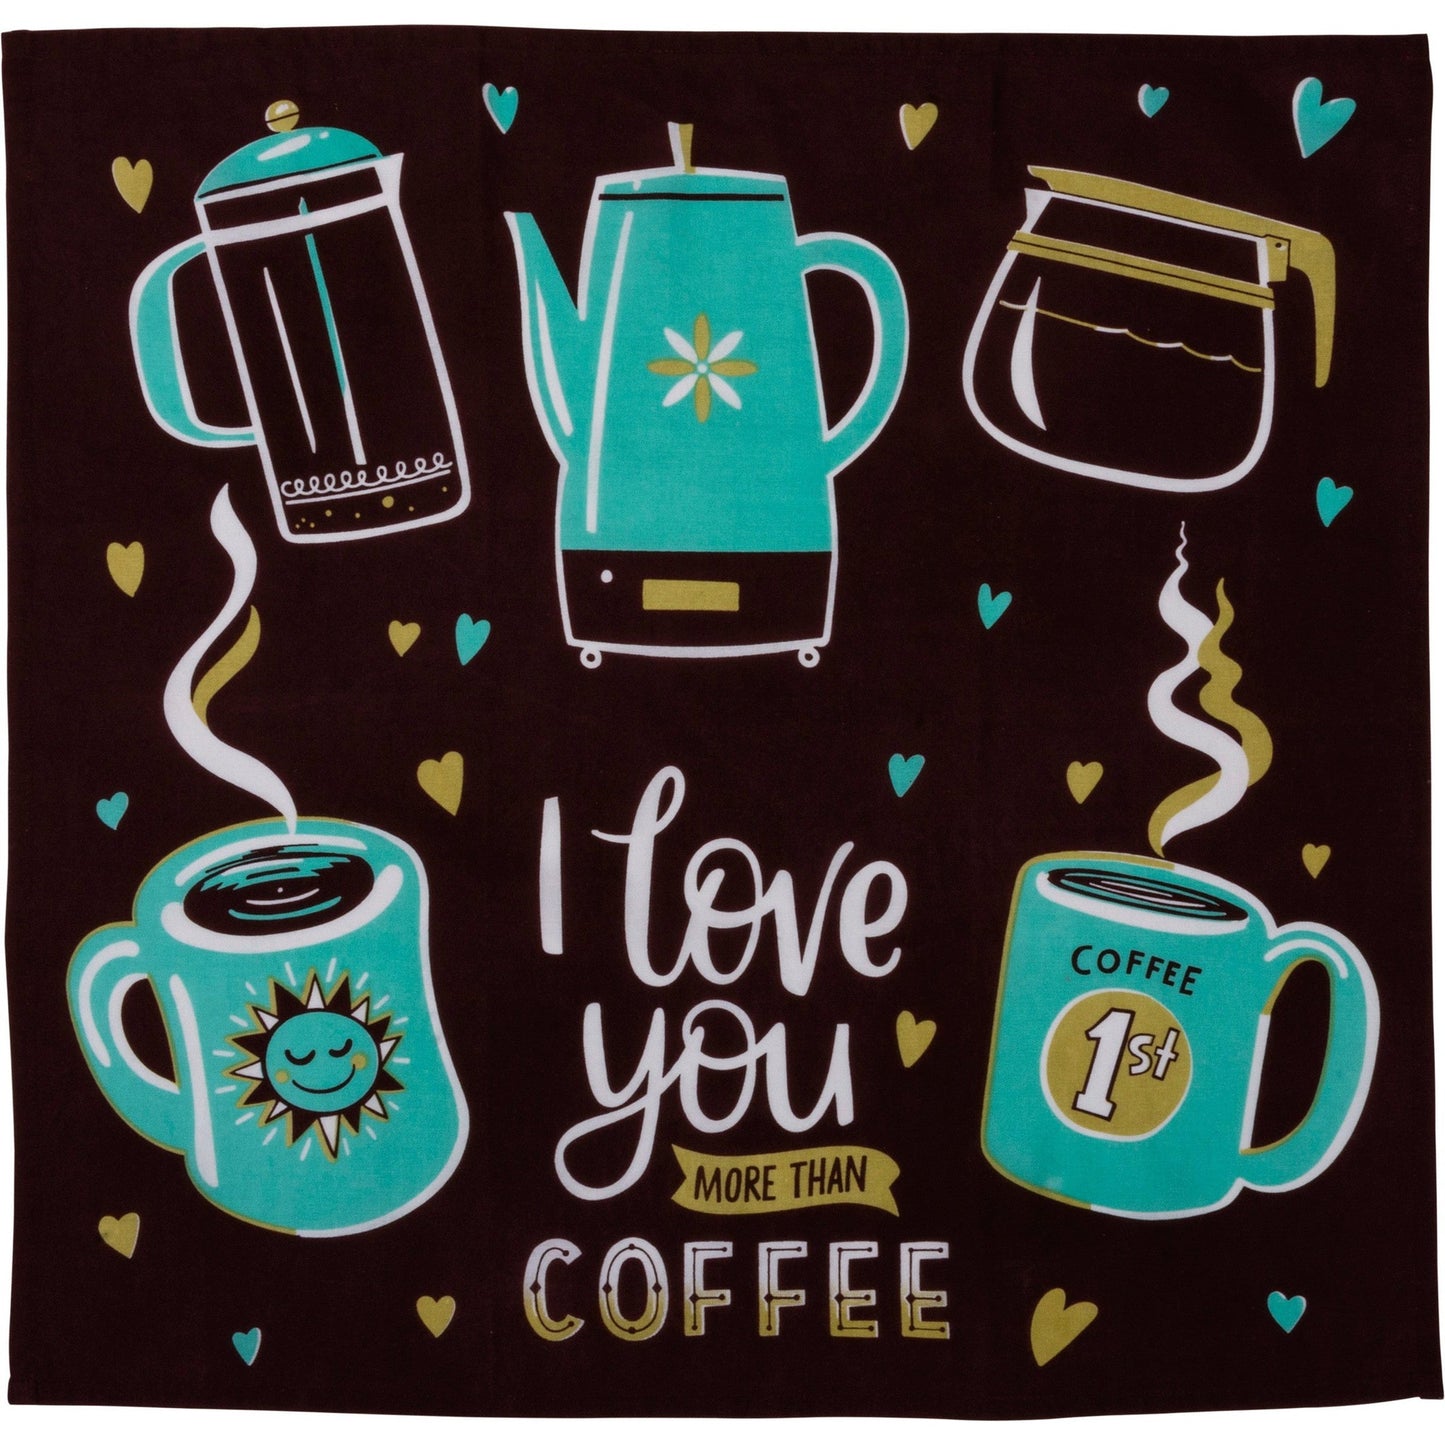 I Love You More Than Coffee Dish Cloth Towel | Novelty Silly Tea Towels | Hilarious Kitchen Hand Towel | 28" x 28"